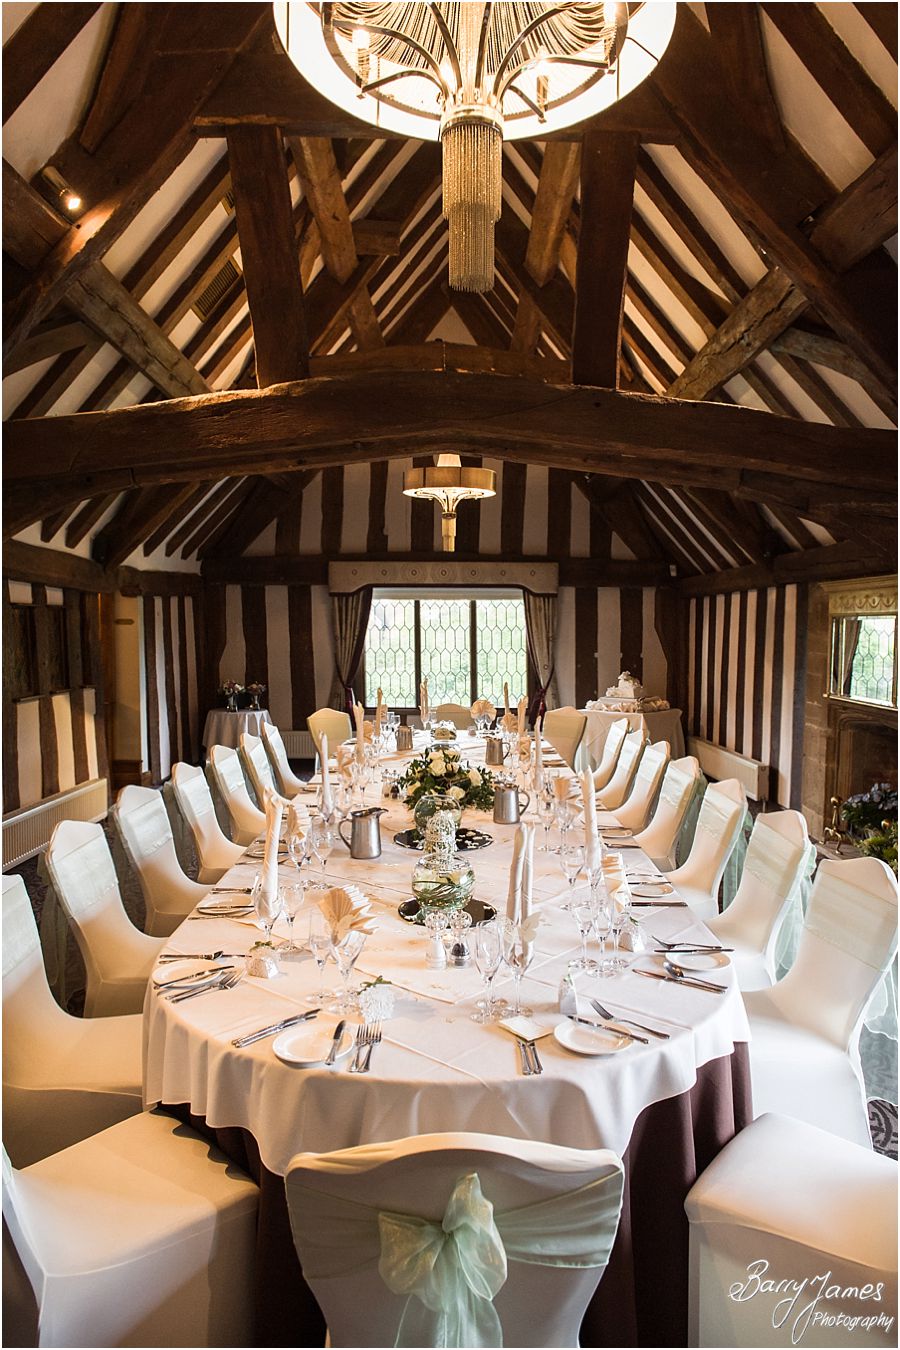 Gorgeous wedding setting at The Moat House in Acton Trussell by Stafford Wedding Photographer Barry James